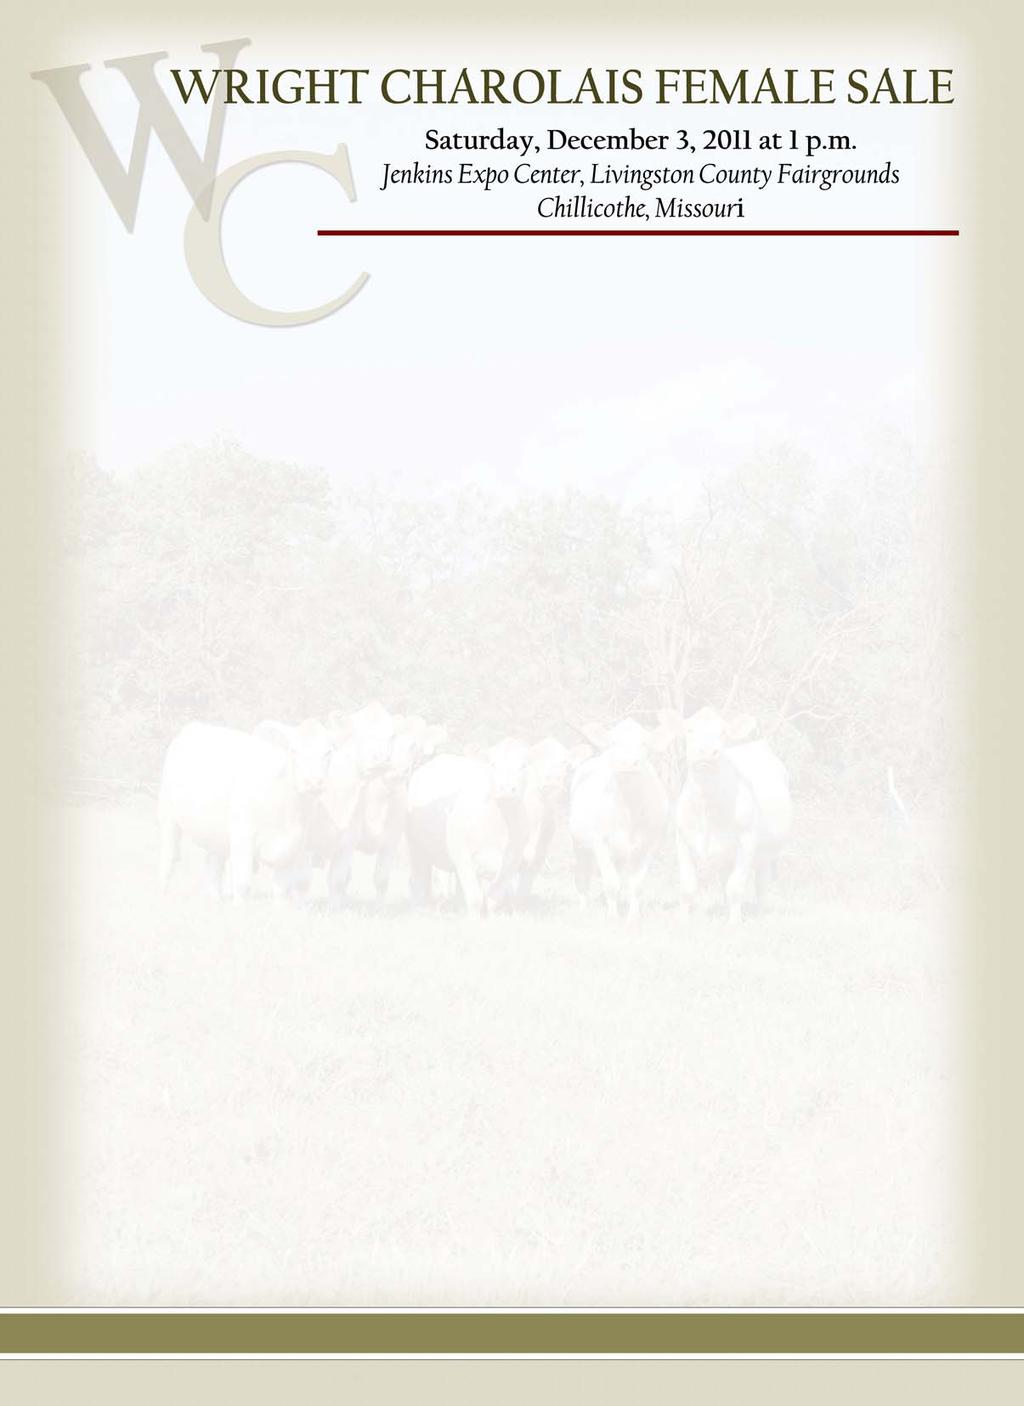 Dear Charolais Friends: Dear Charolais Friends: Welcome to our first ever female sale. As many of you know, I grew up around white cattle. My grandfather purchased his first Charolais in 1959.